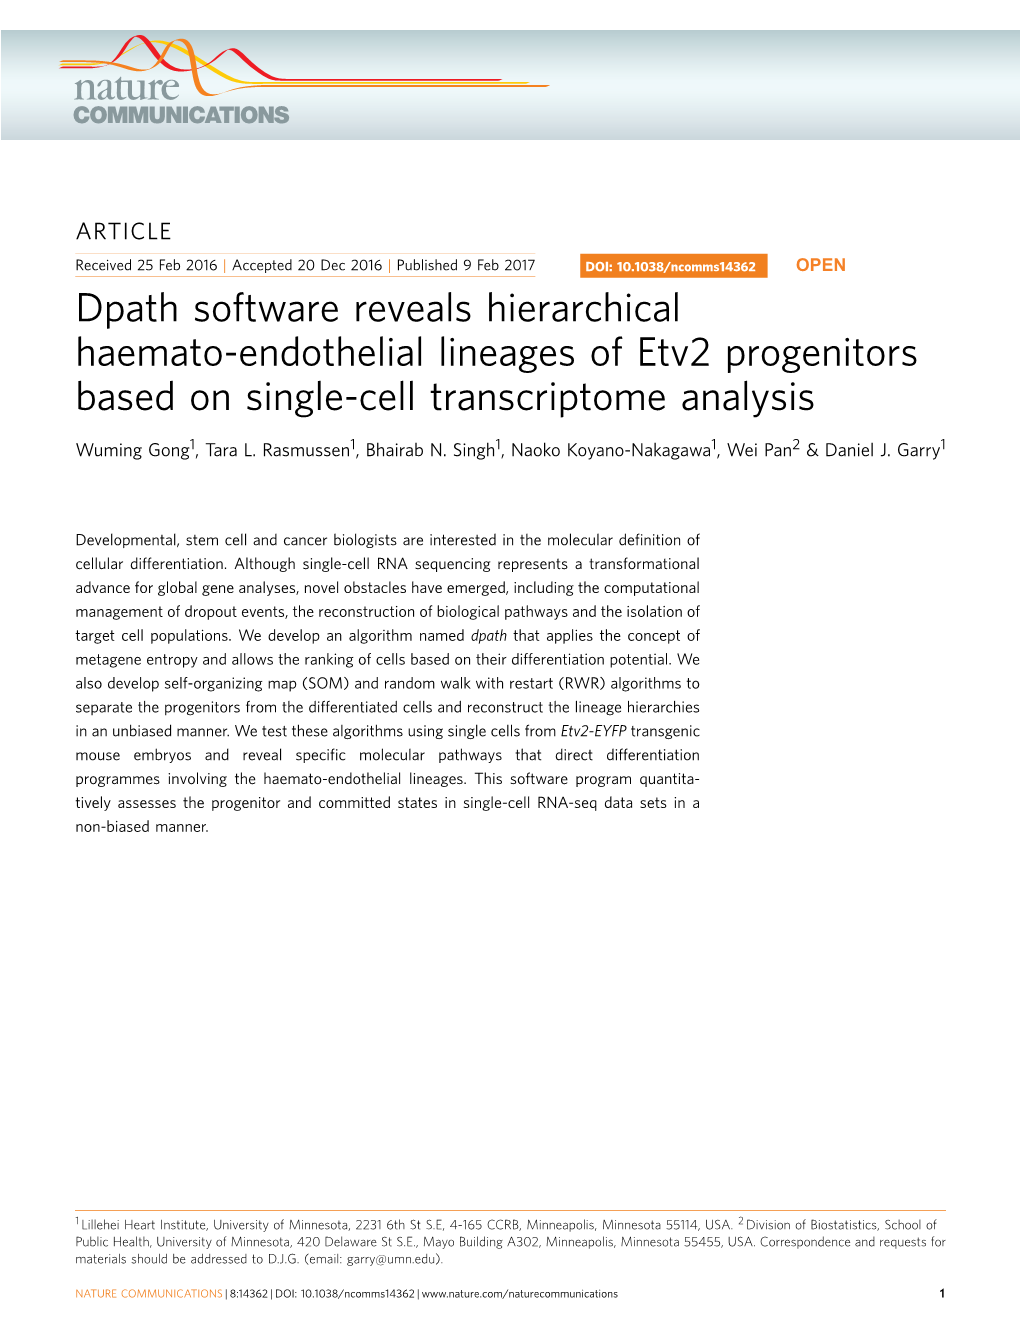 Dpath Software Reveals Hierarchical Haemato-Endothelial Lineages of Etv2 Progenitors Based on Single-Cell Transcriptome Analysis